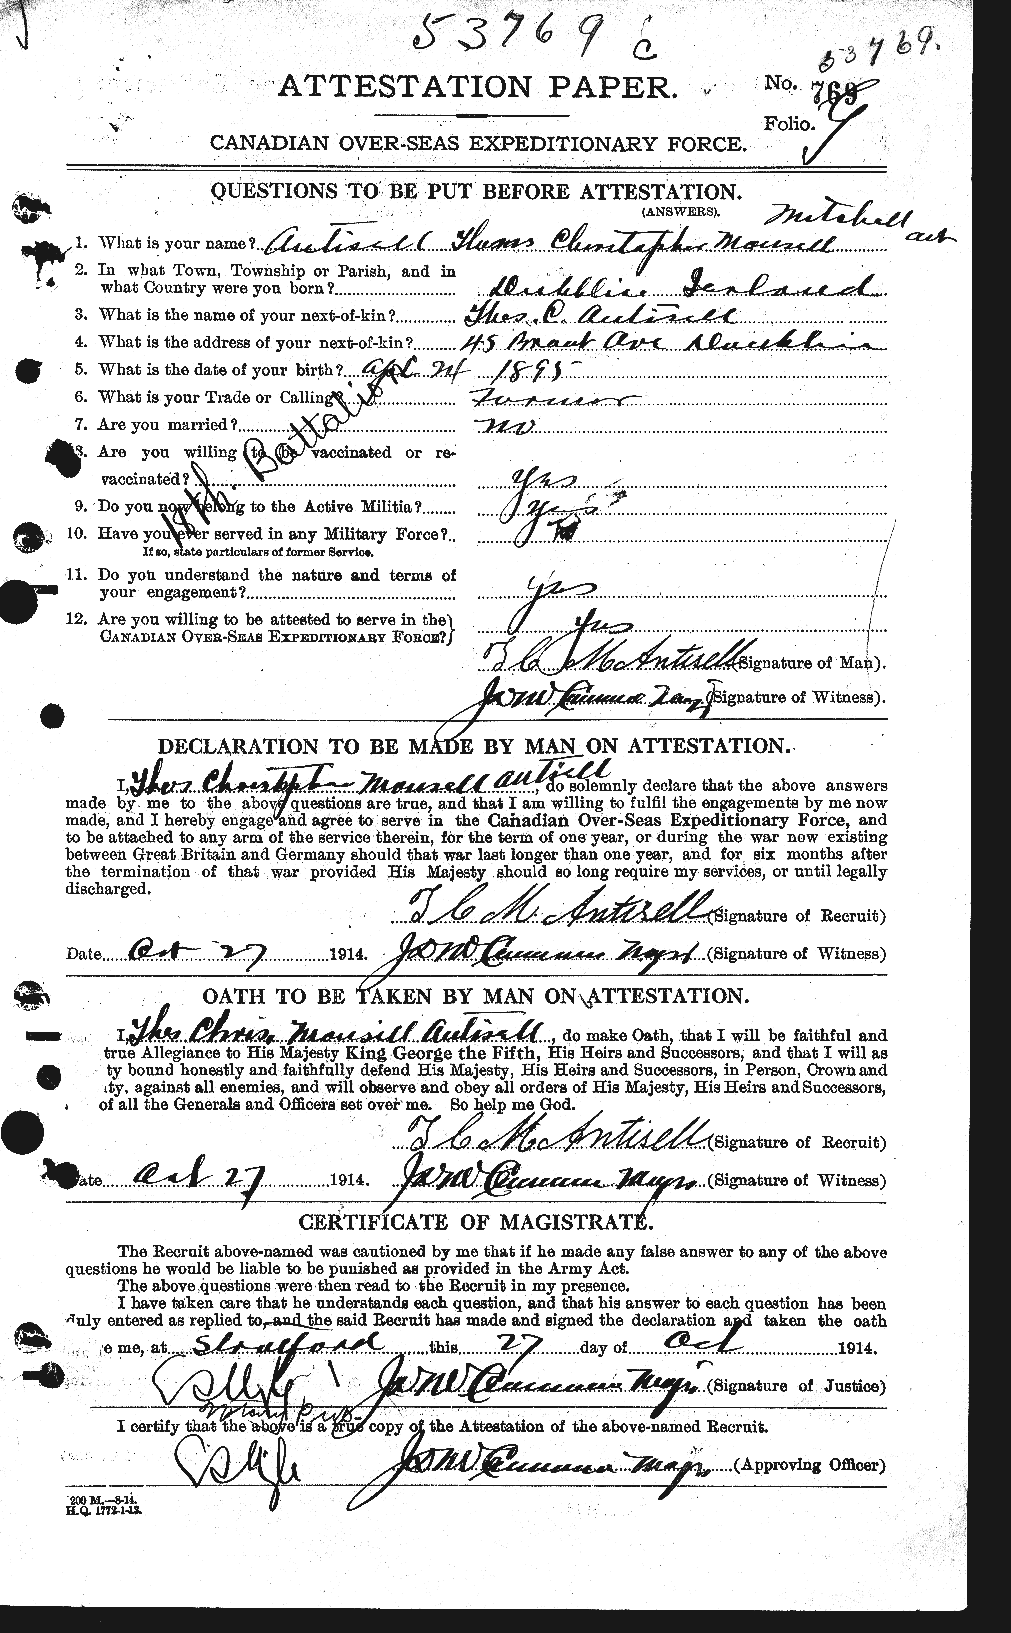 Personnel Records of the First World War - CEF 212131a